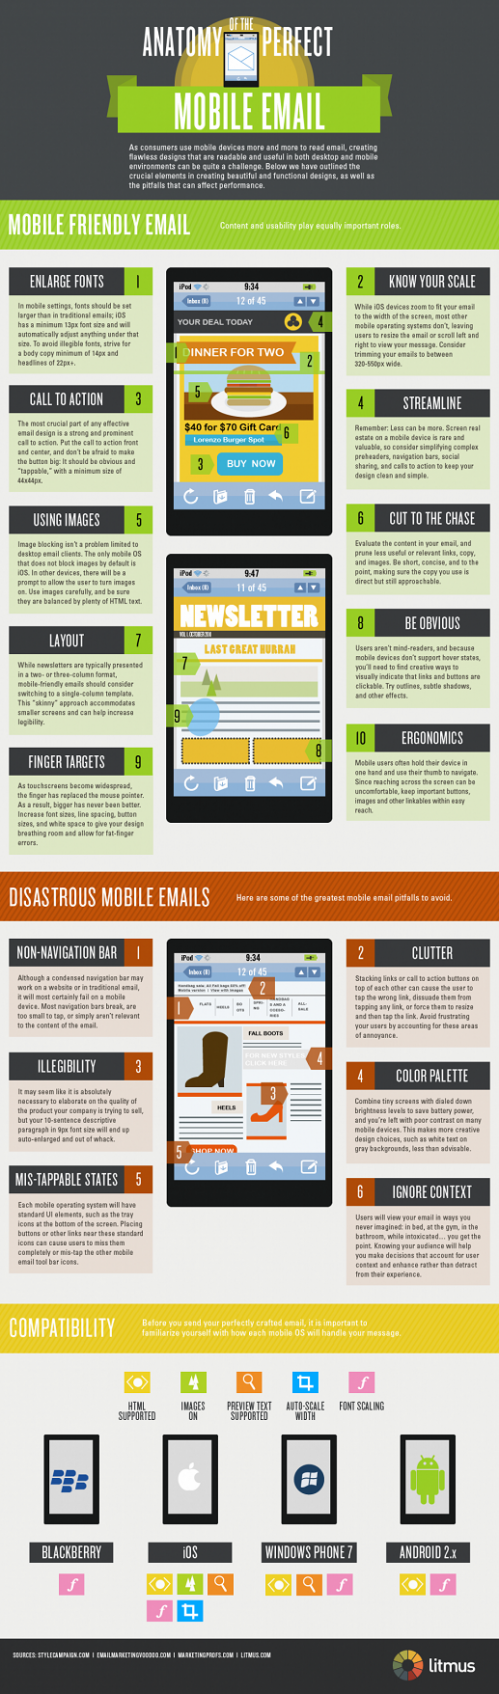 Anatomy of a perfect mobile email infographic